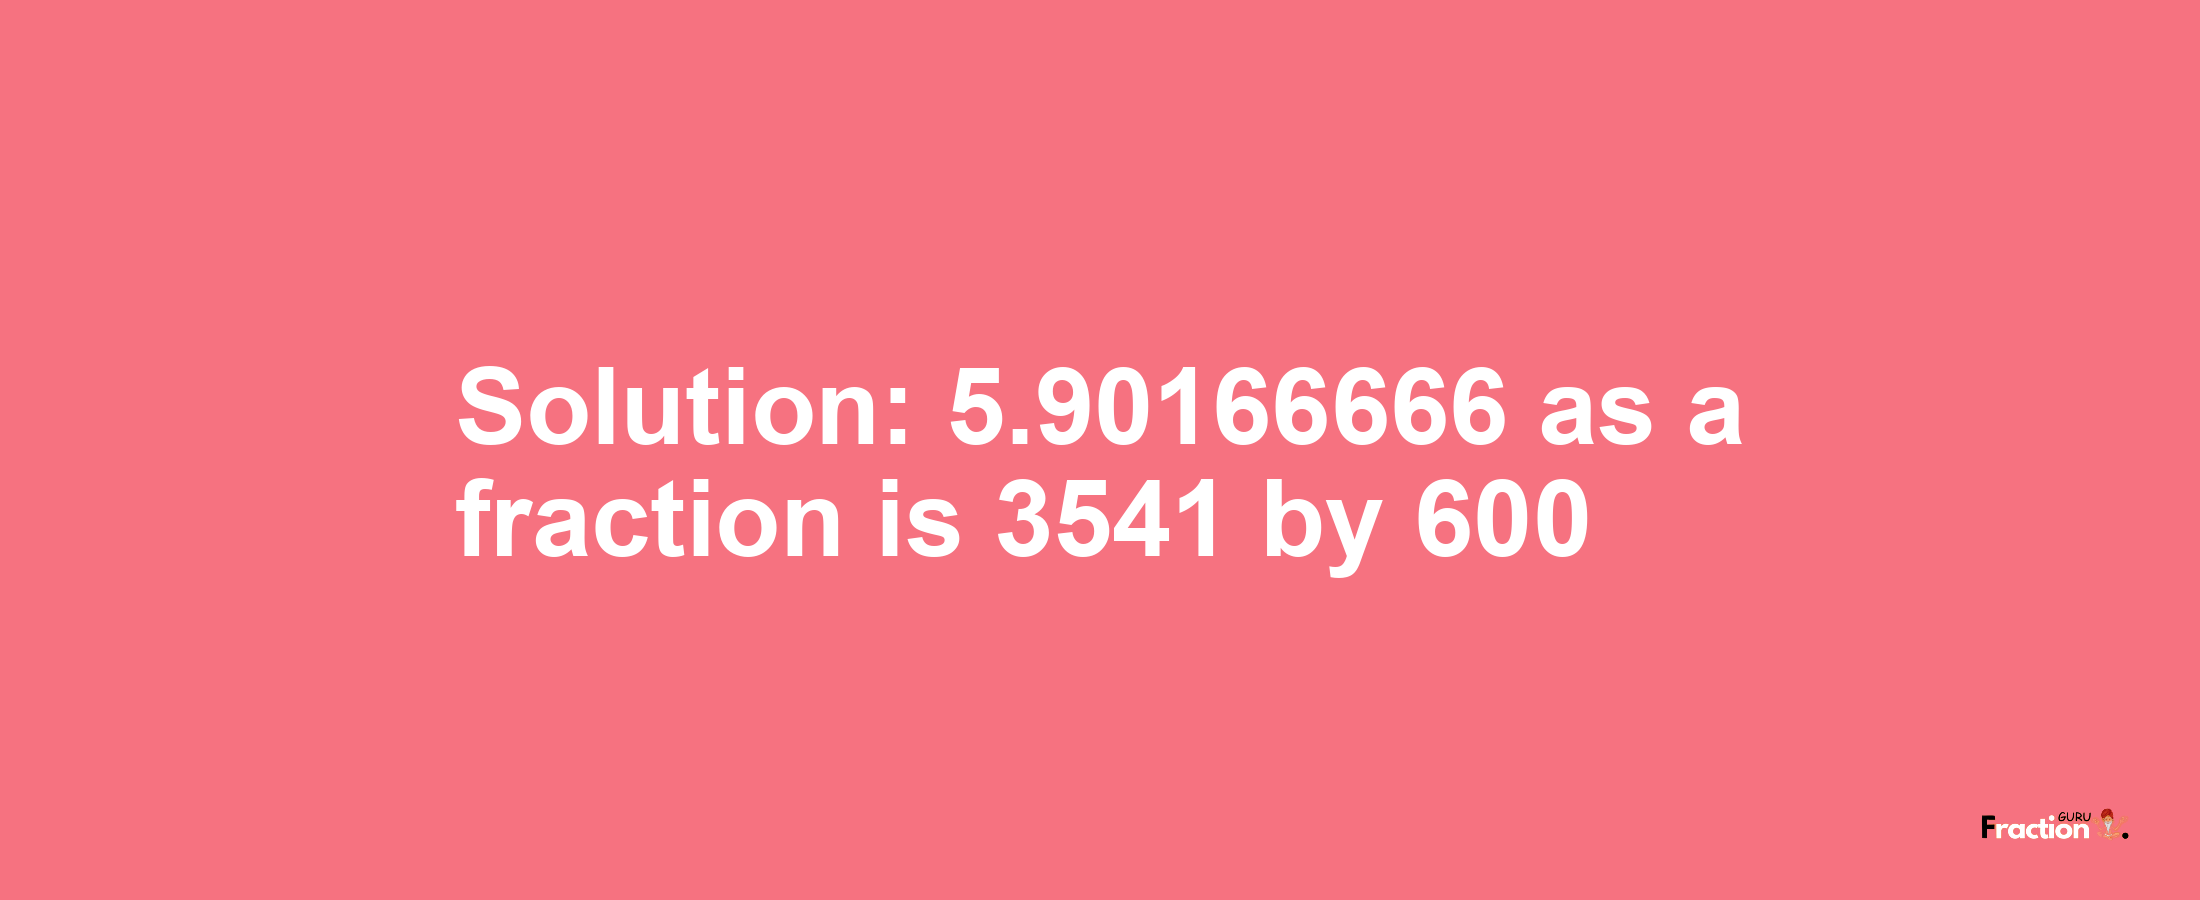 Solution:5.90166666 as a fraction is 3541/600